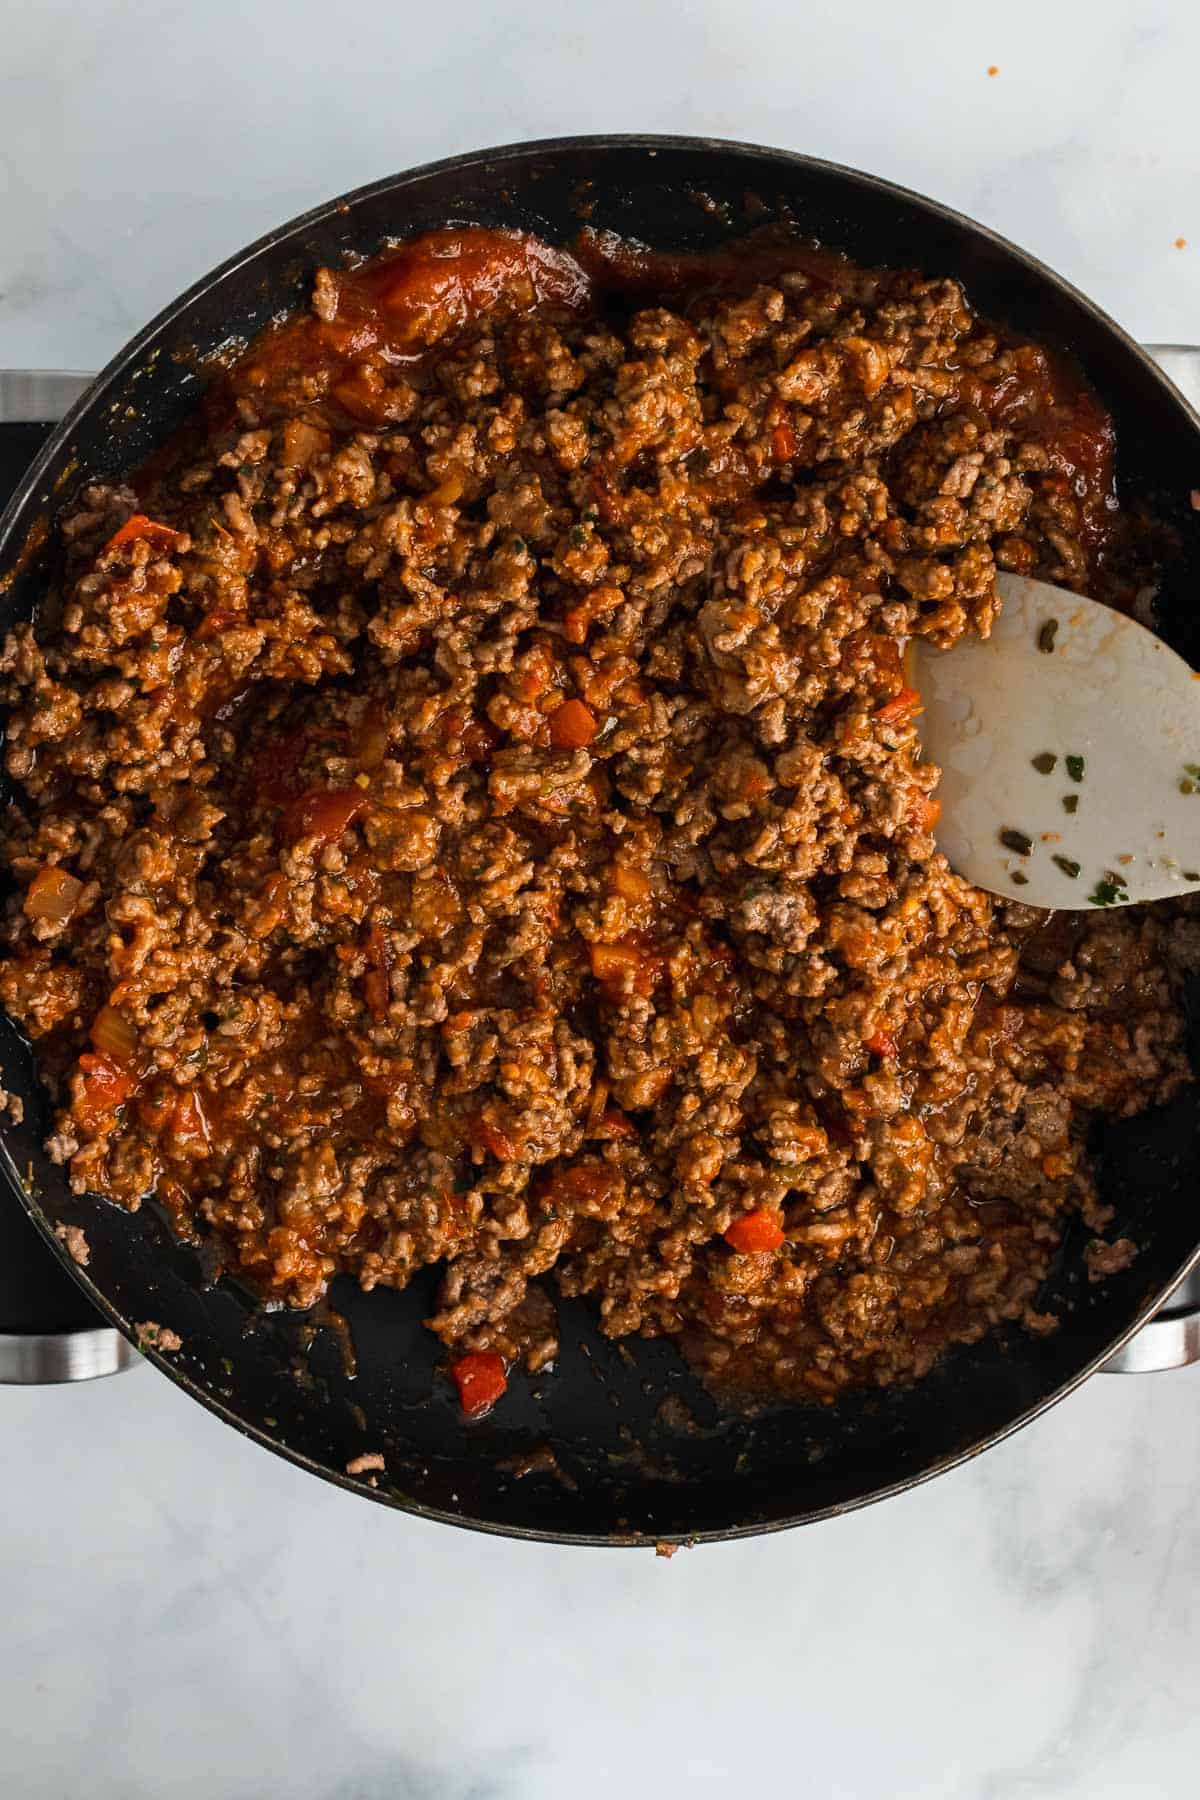 Tomato sauce stirred into the cooked ground beef in the skillet, as seen from above